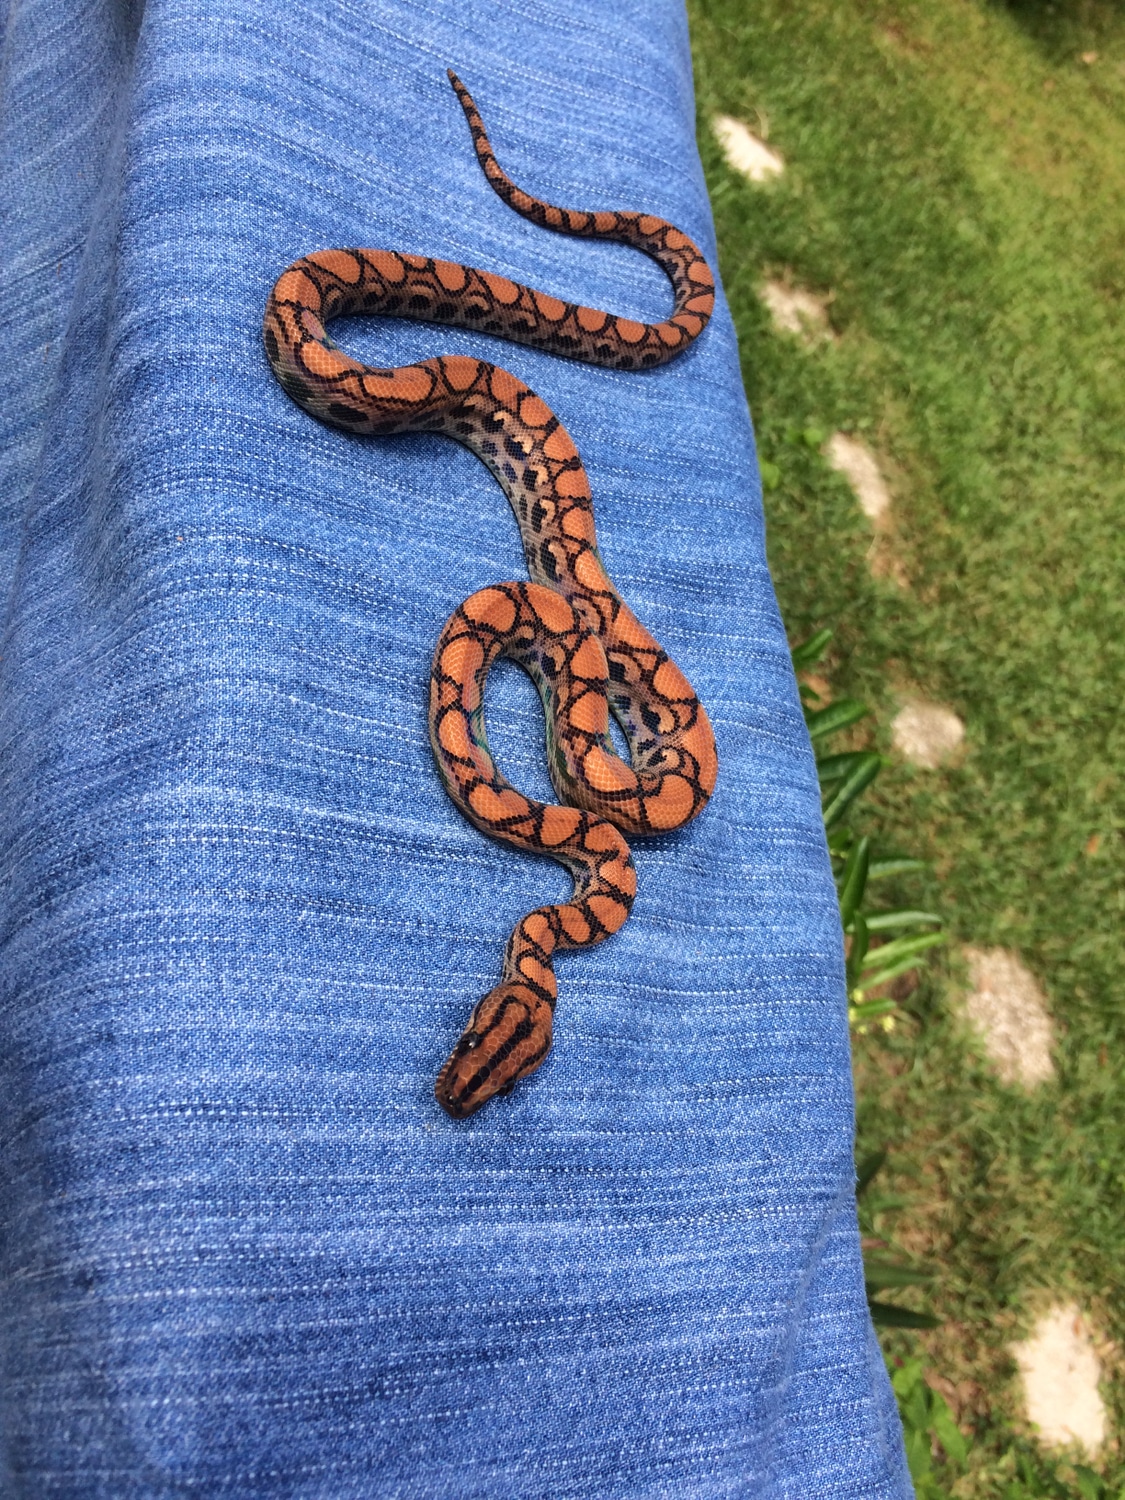 2018 Yearling Bessette Calico Line Pos Het Eugene Stripe Brazilian Rainbow Boa by Reese Rainbows and Reptiles